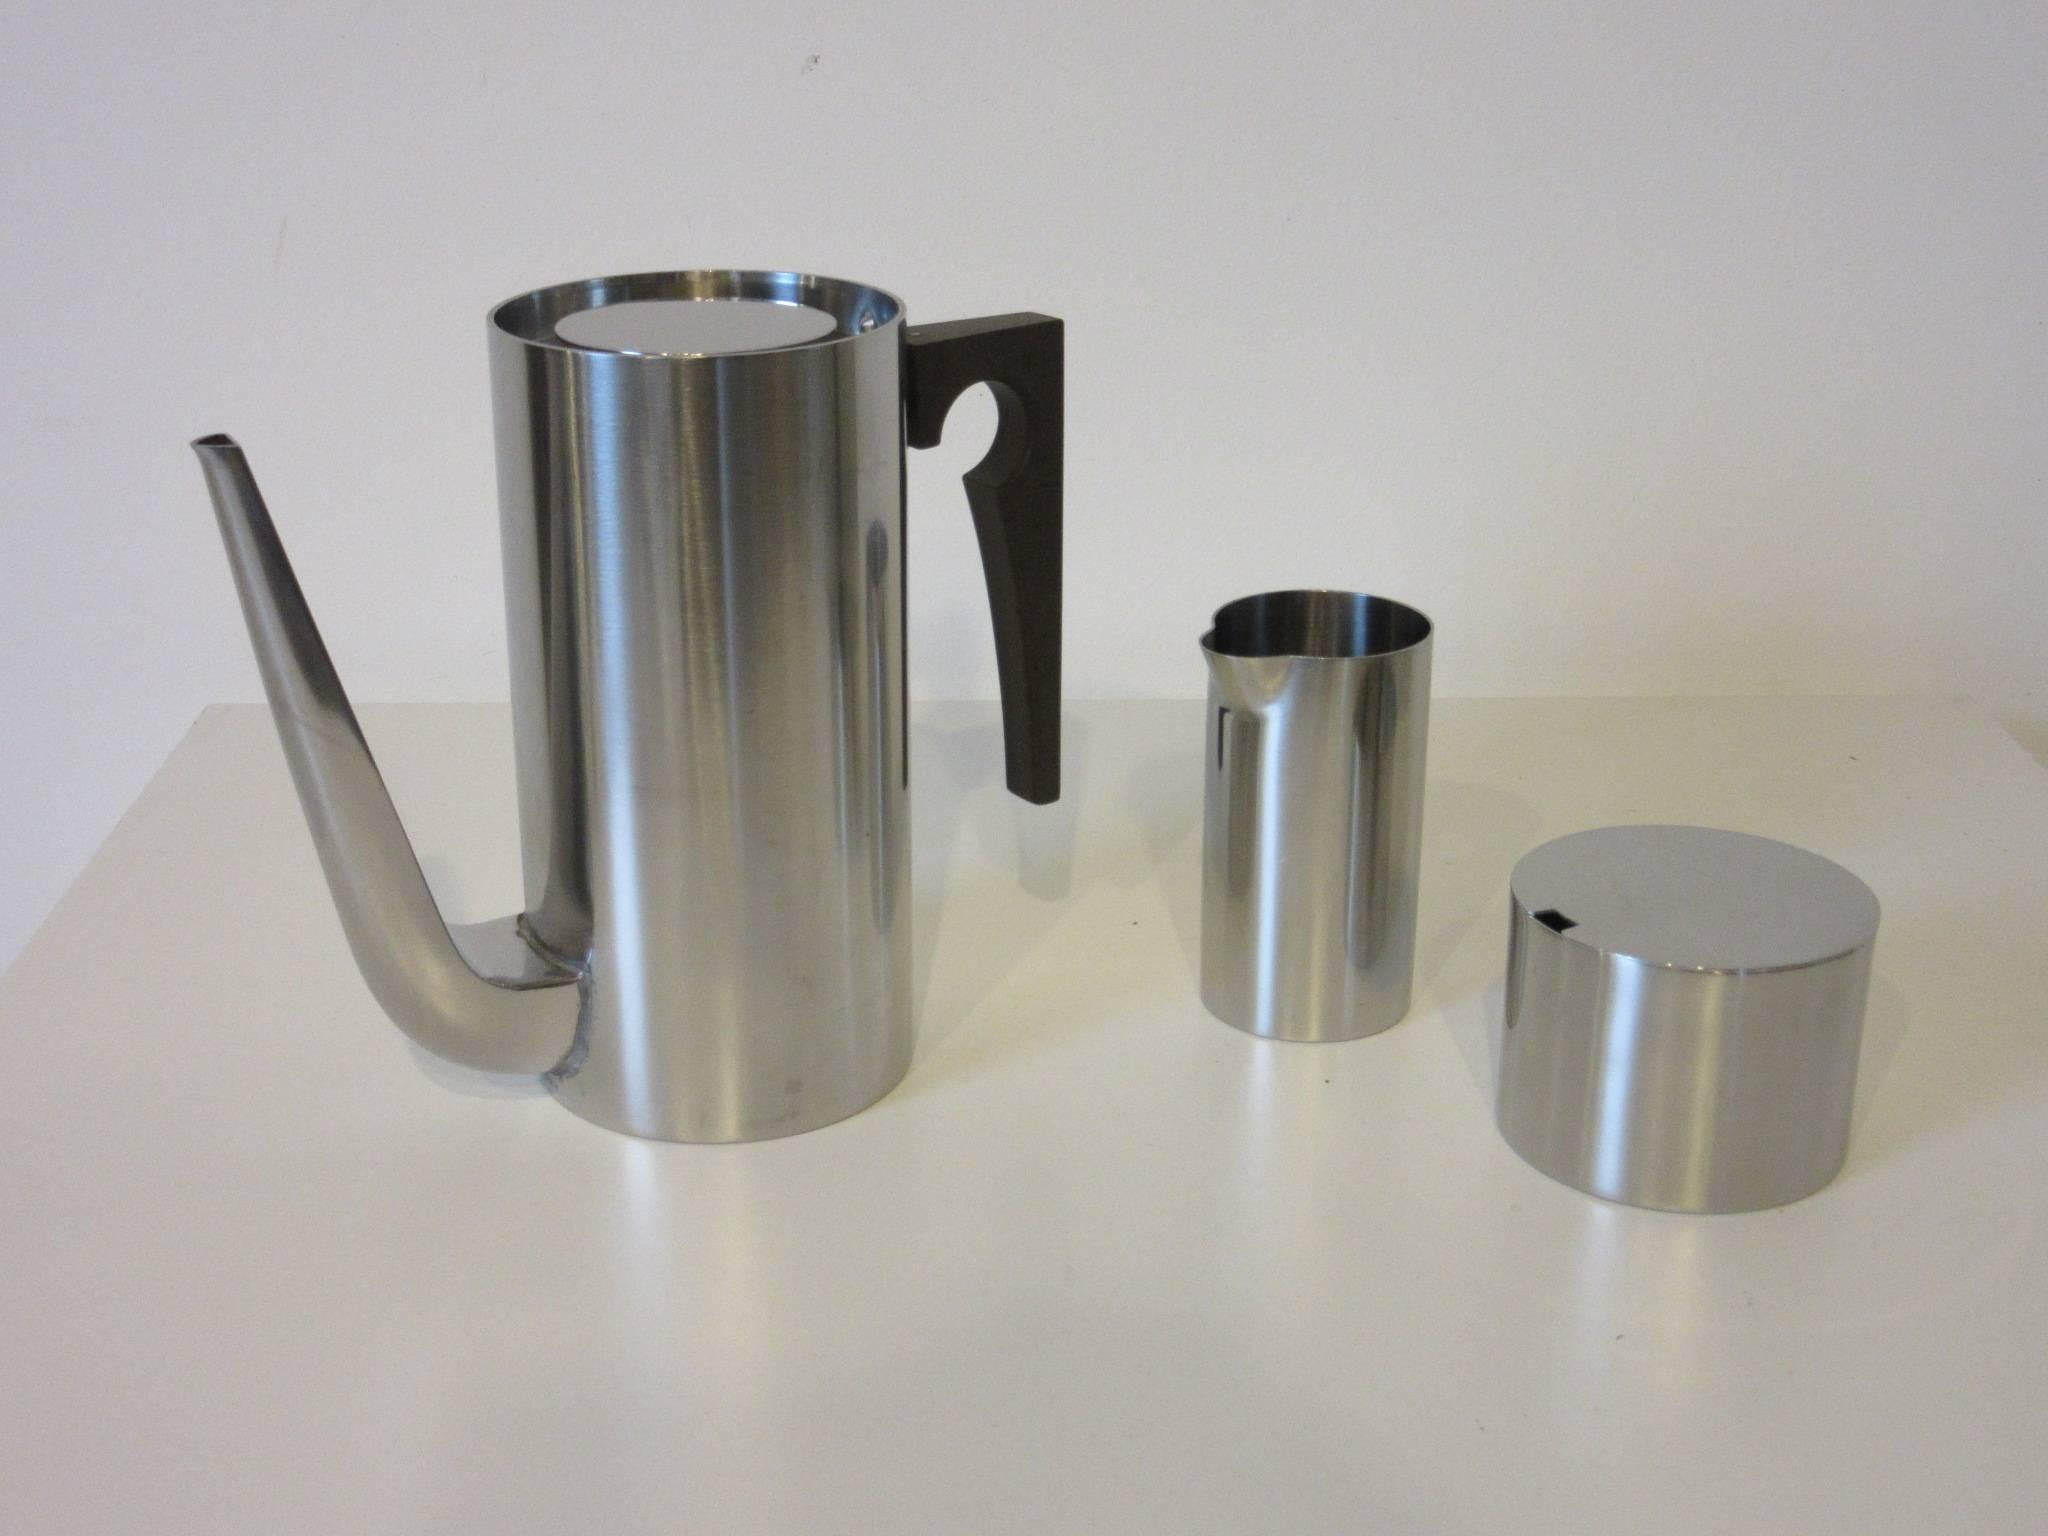 A four piece stainless steel coffee set with stylish serving tray, coffee pot, sugar container and creamer made in Denmark by Stelton.